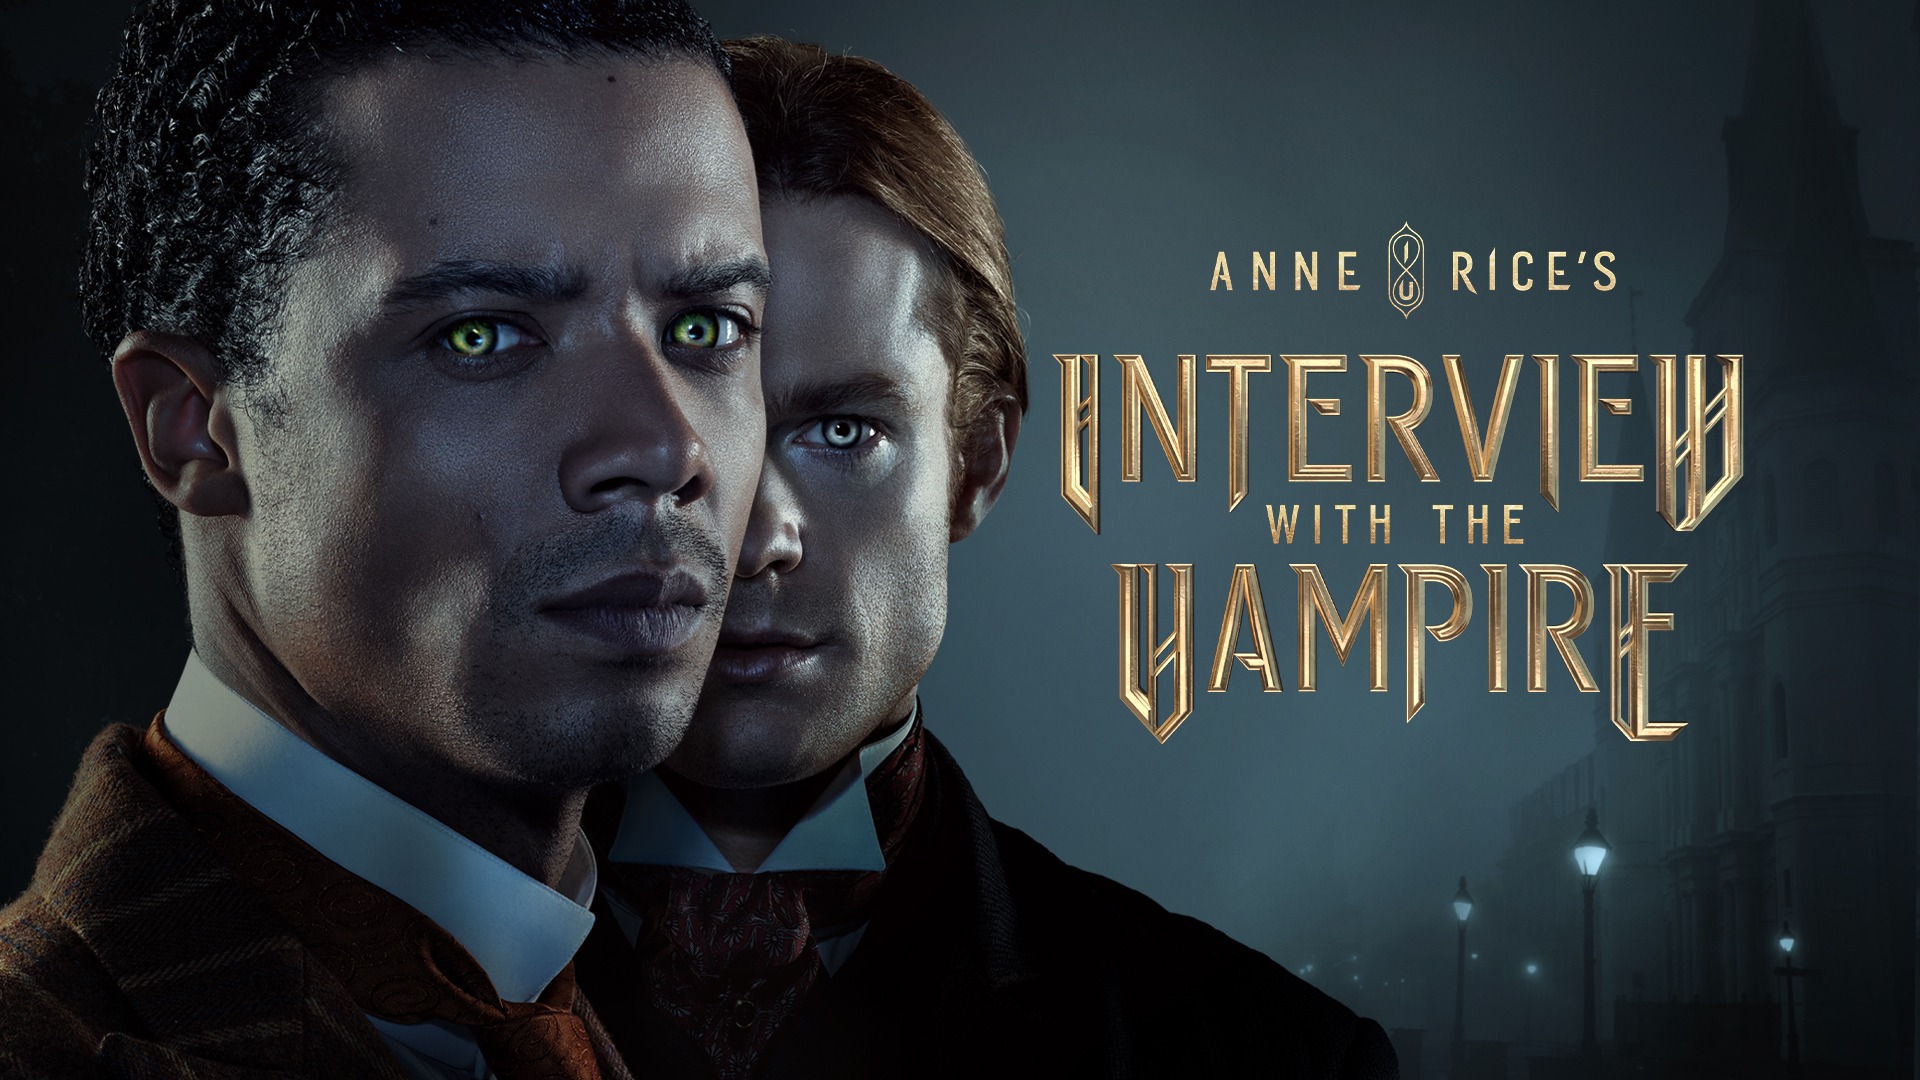 #Anne Rice’s Interview with the Vampire: Season Two Trailer and Key Art Released by AMC